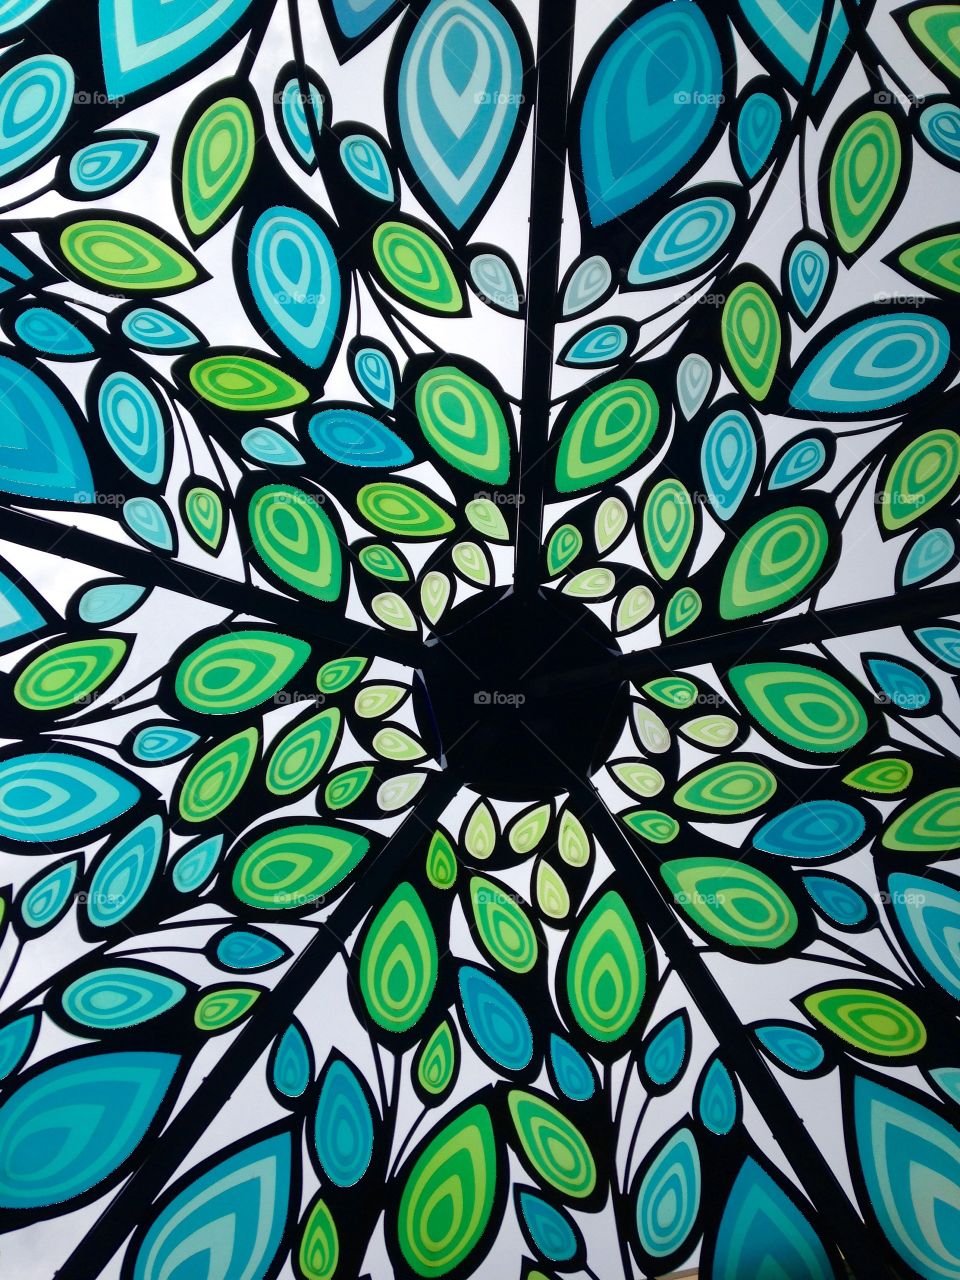 Happy_flower. Looking up under a mosaic of a peacock collage.  